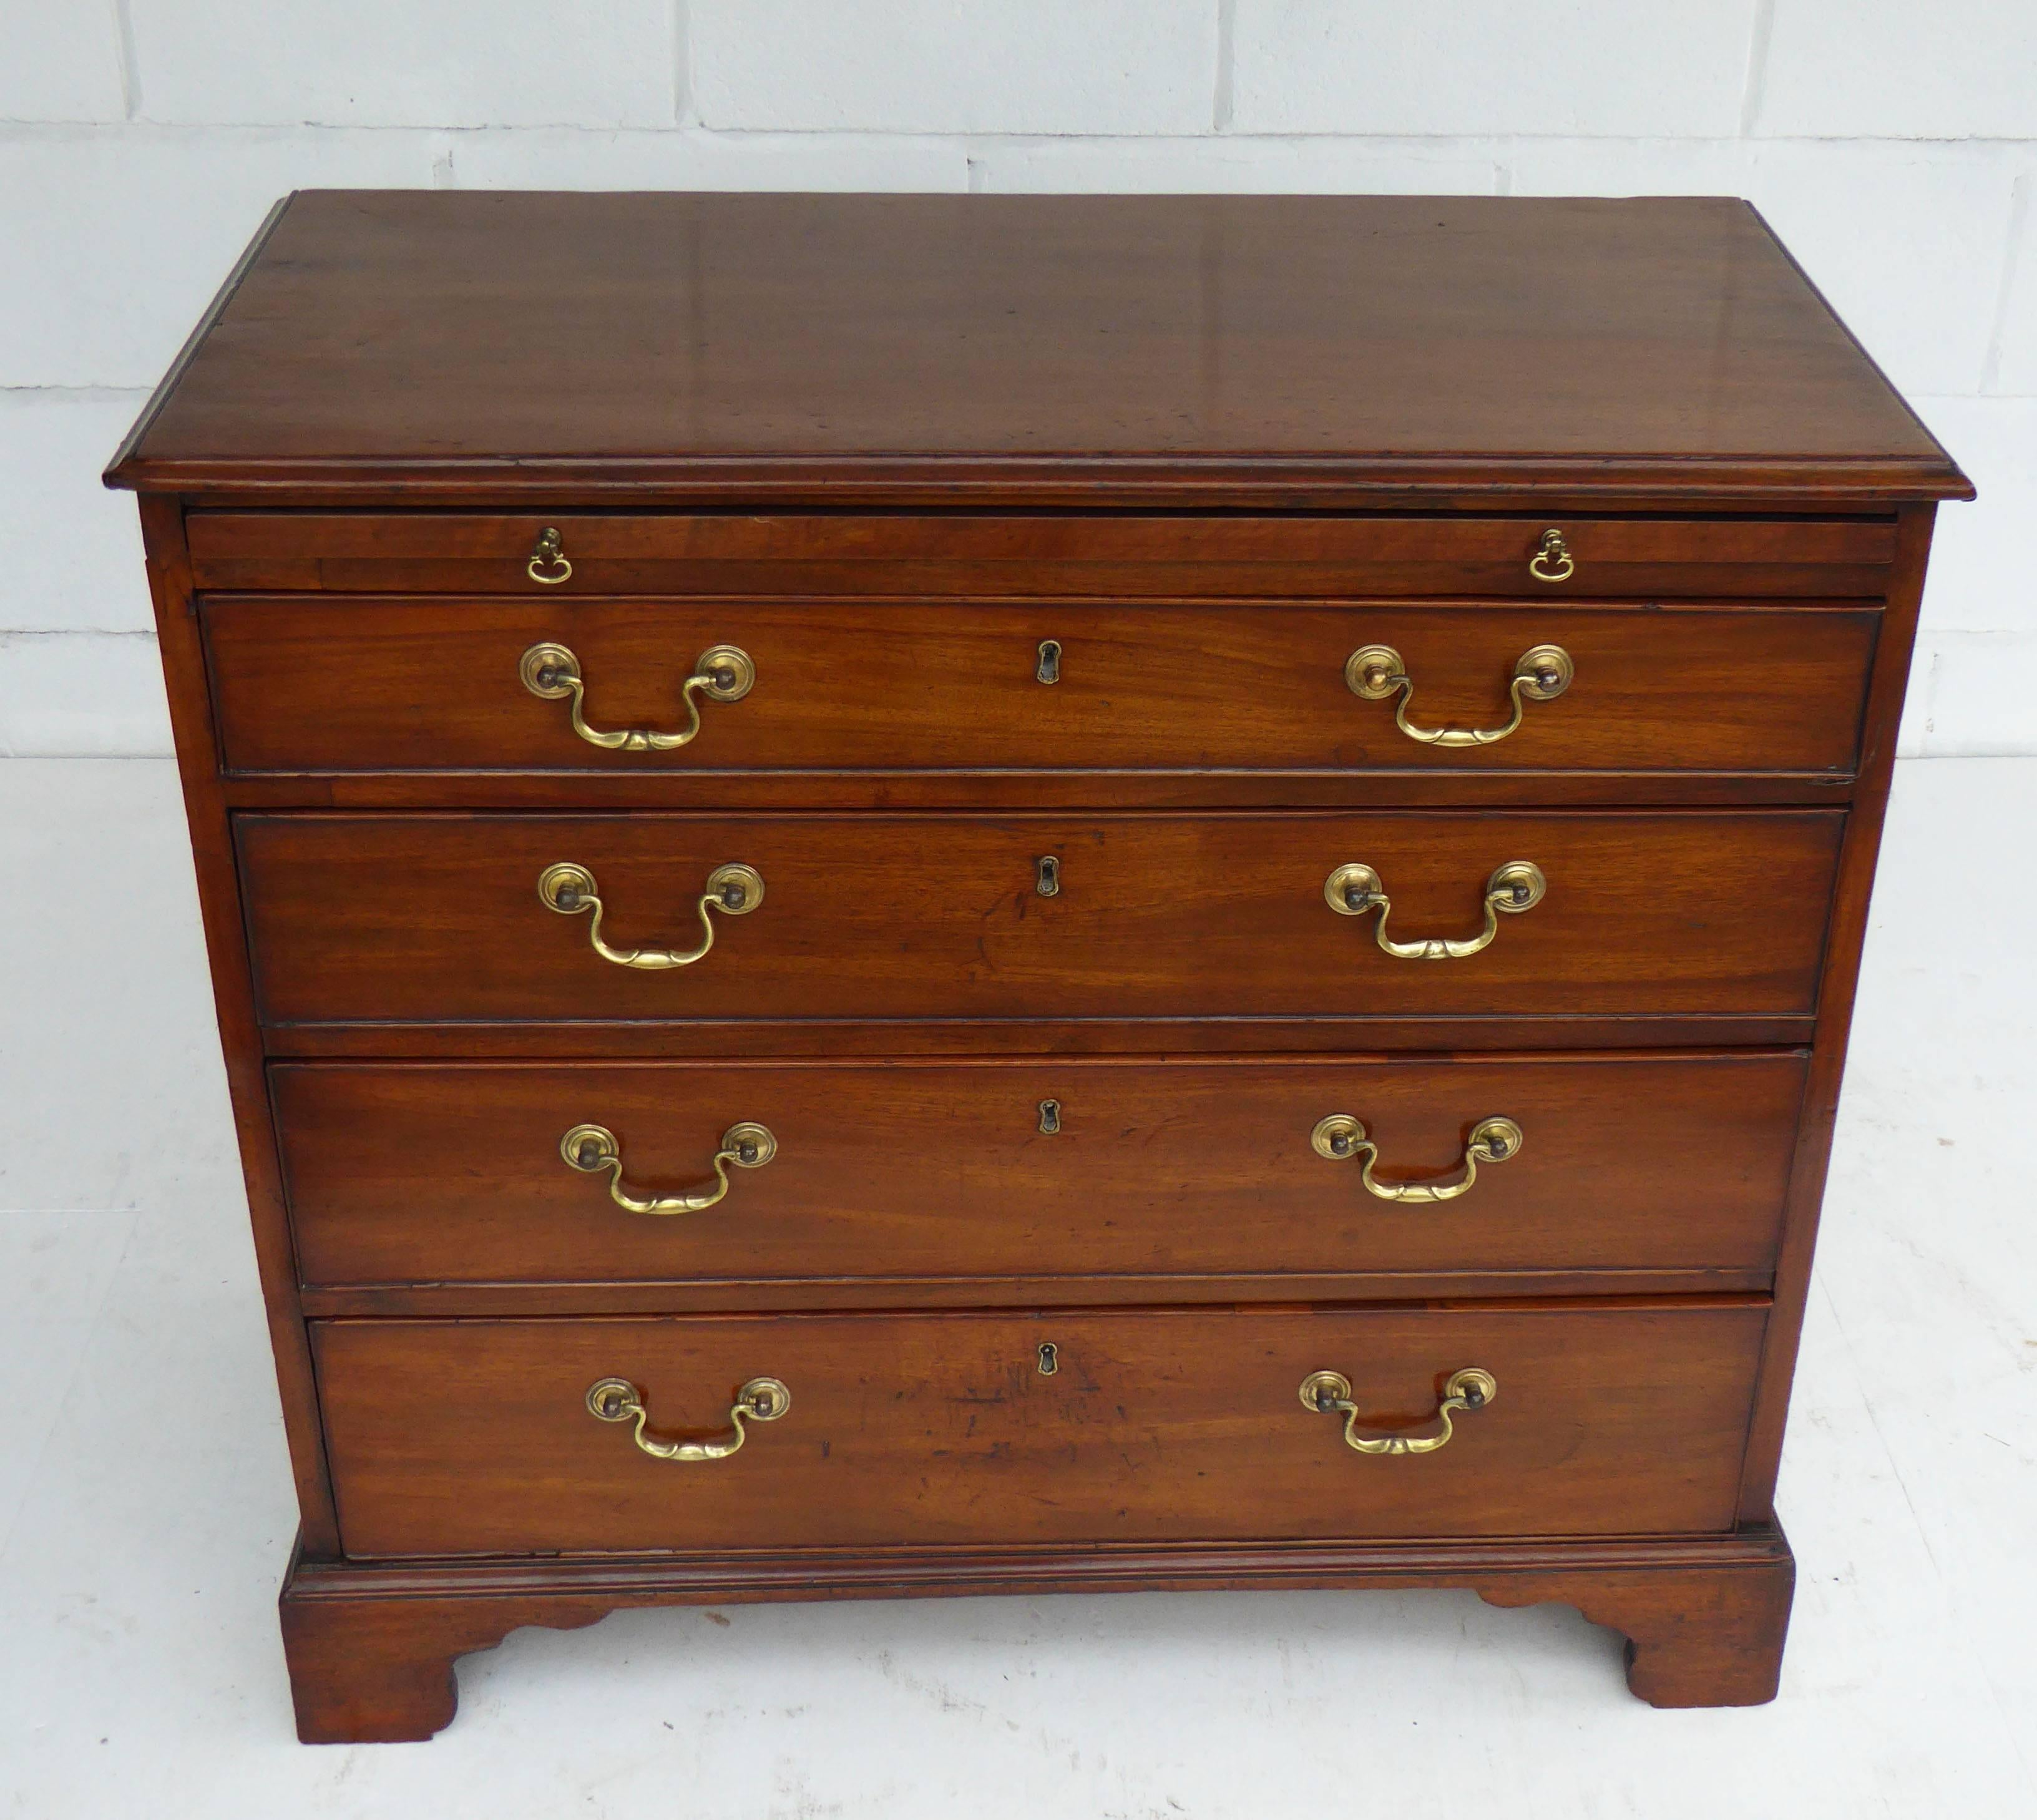 For sale is a good quality George III mahogany chest of drawers with brushing slide. The chest has an assortment of four graduated drawers, each with brass swan neck handles. The chest stands on bracket feet and is in very good condition having been